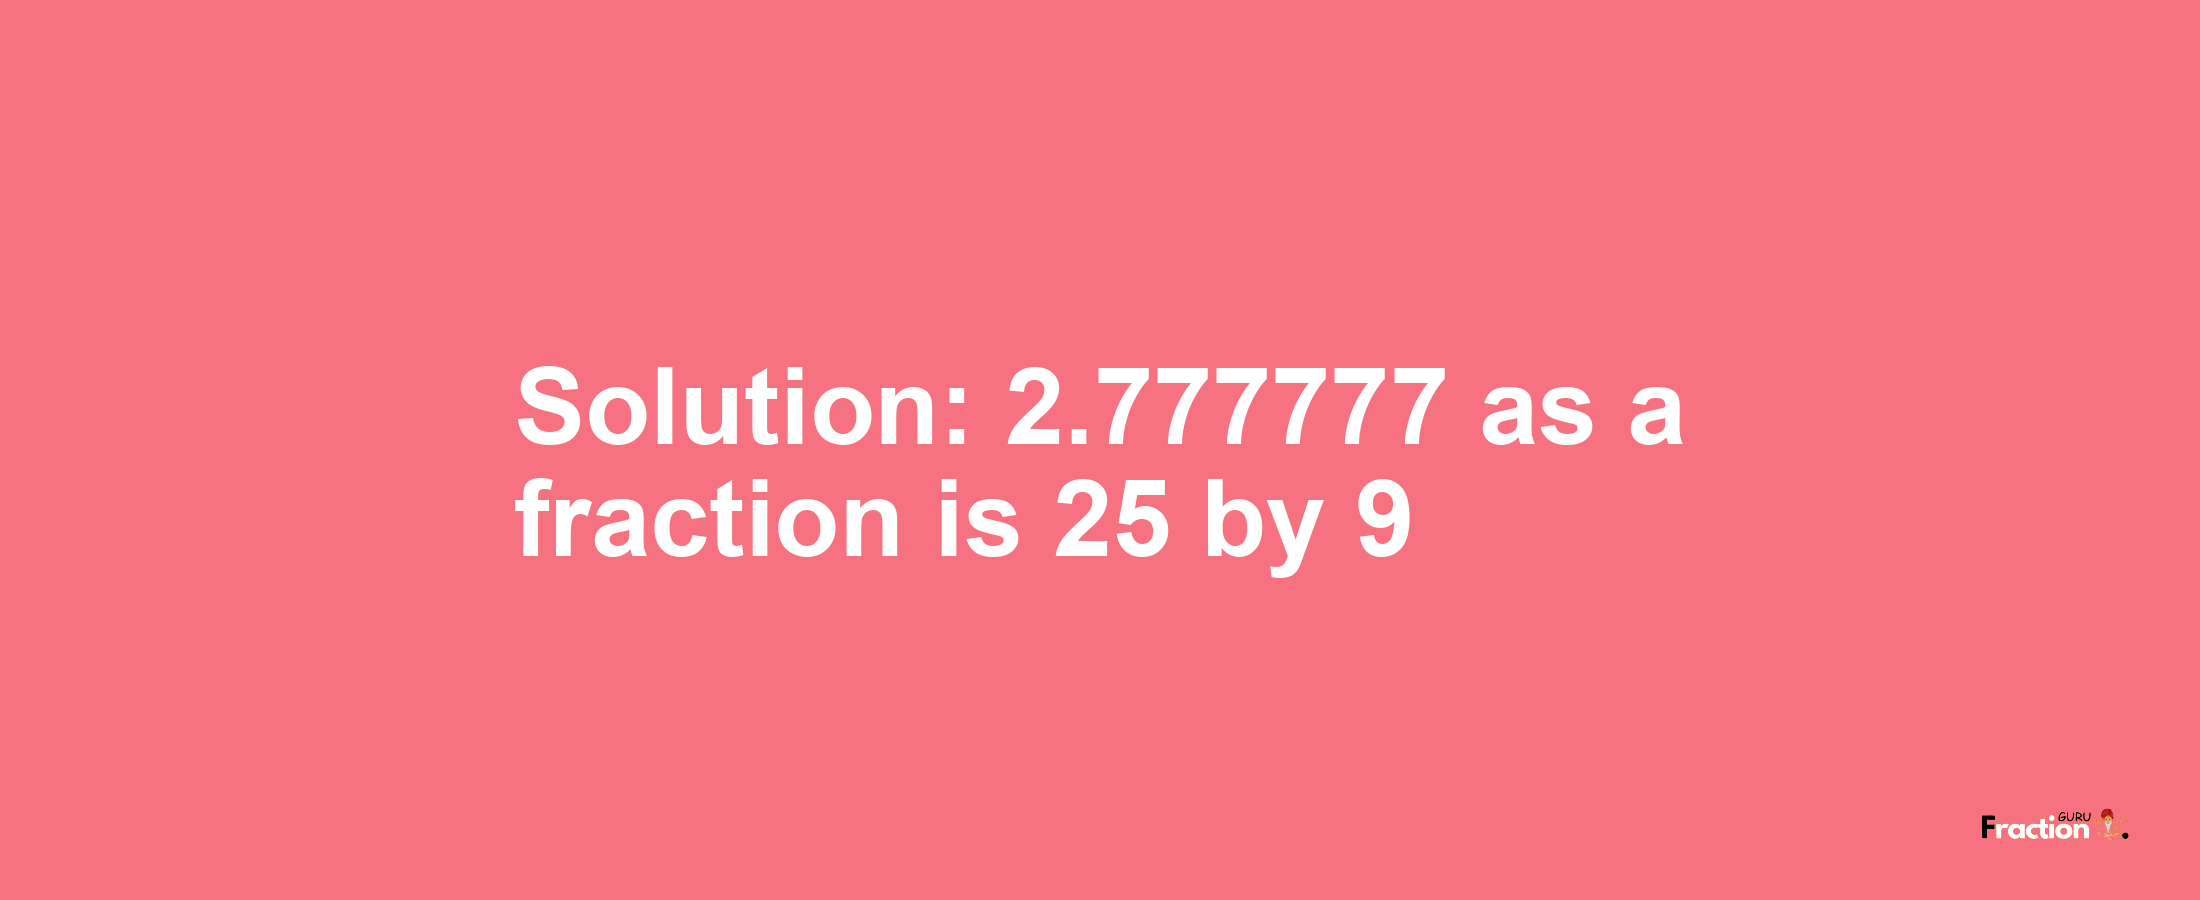 Solution:2.777777 as a fraction is 25/9